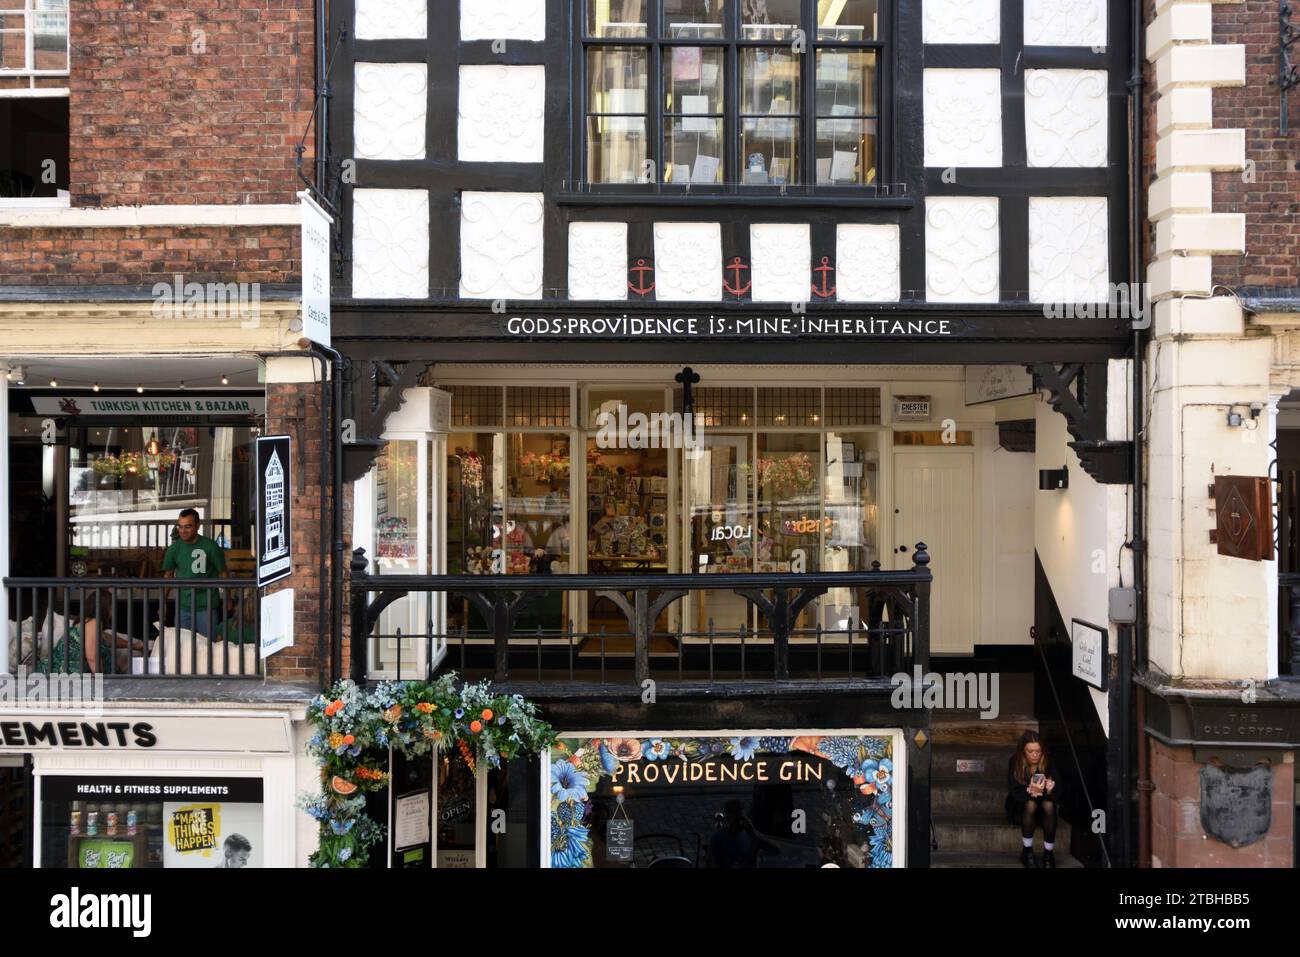 God's Providence House (1652) & Boutique Shops on The Rows Watergate Street Old Town or Historic District Chester England UK Stock Photo